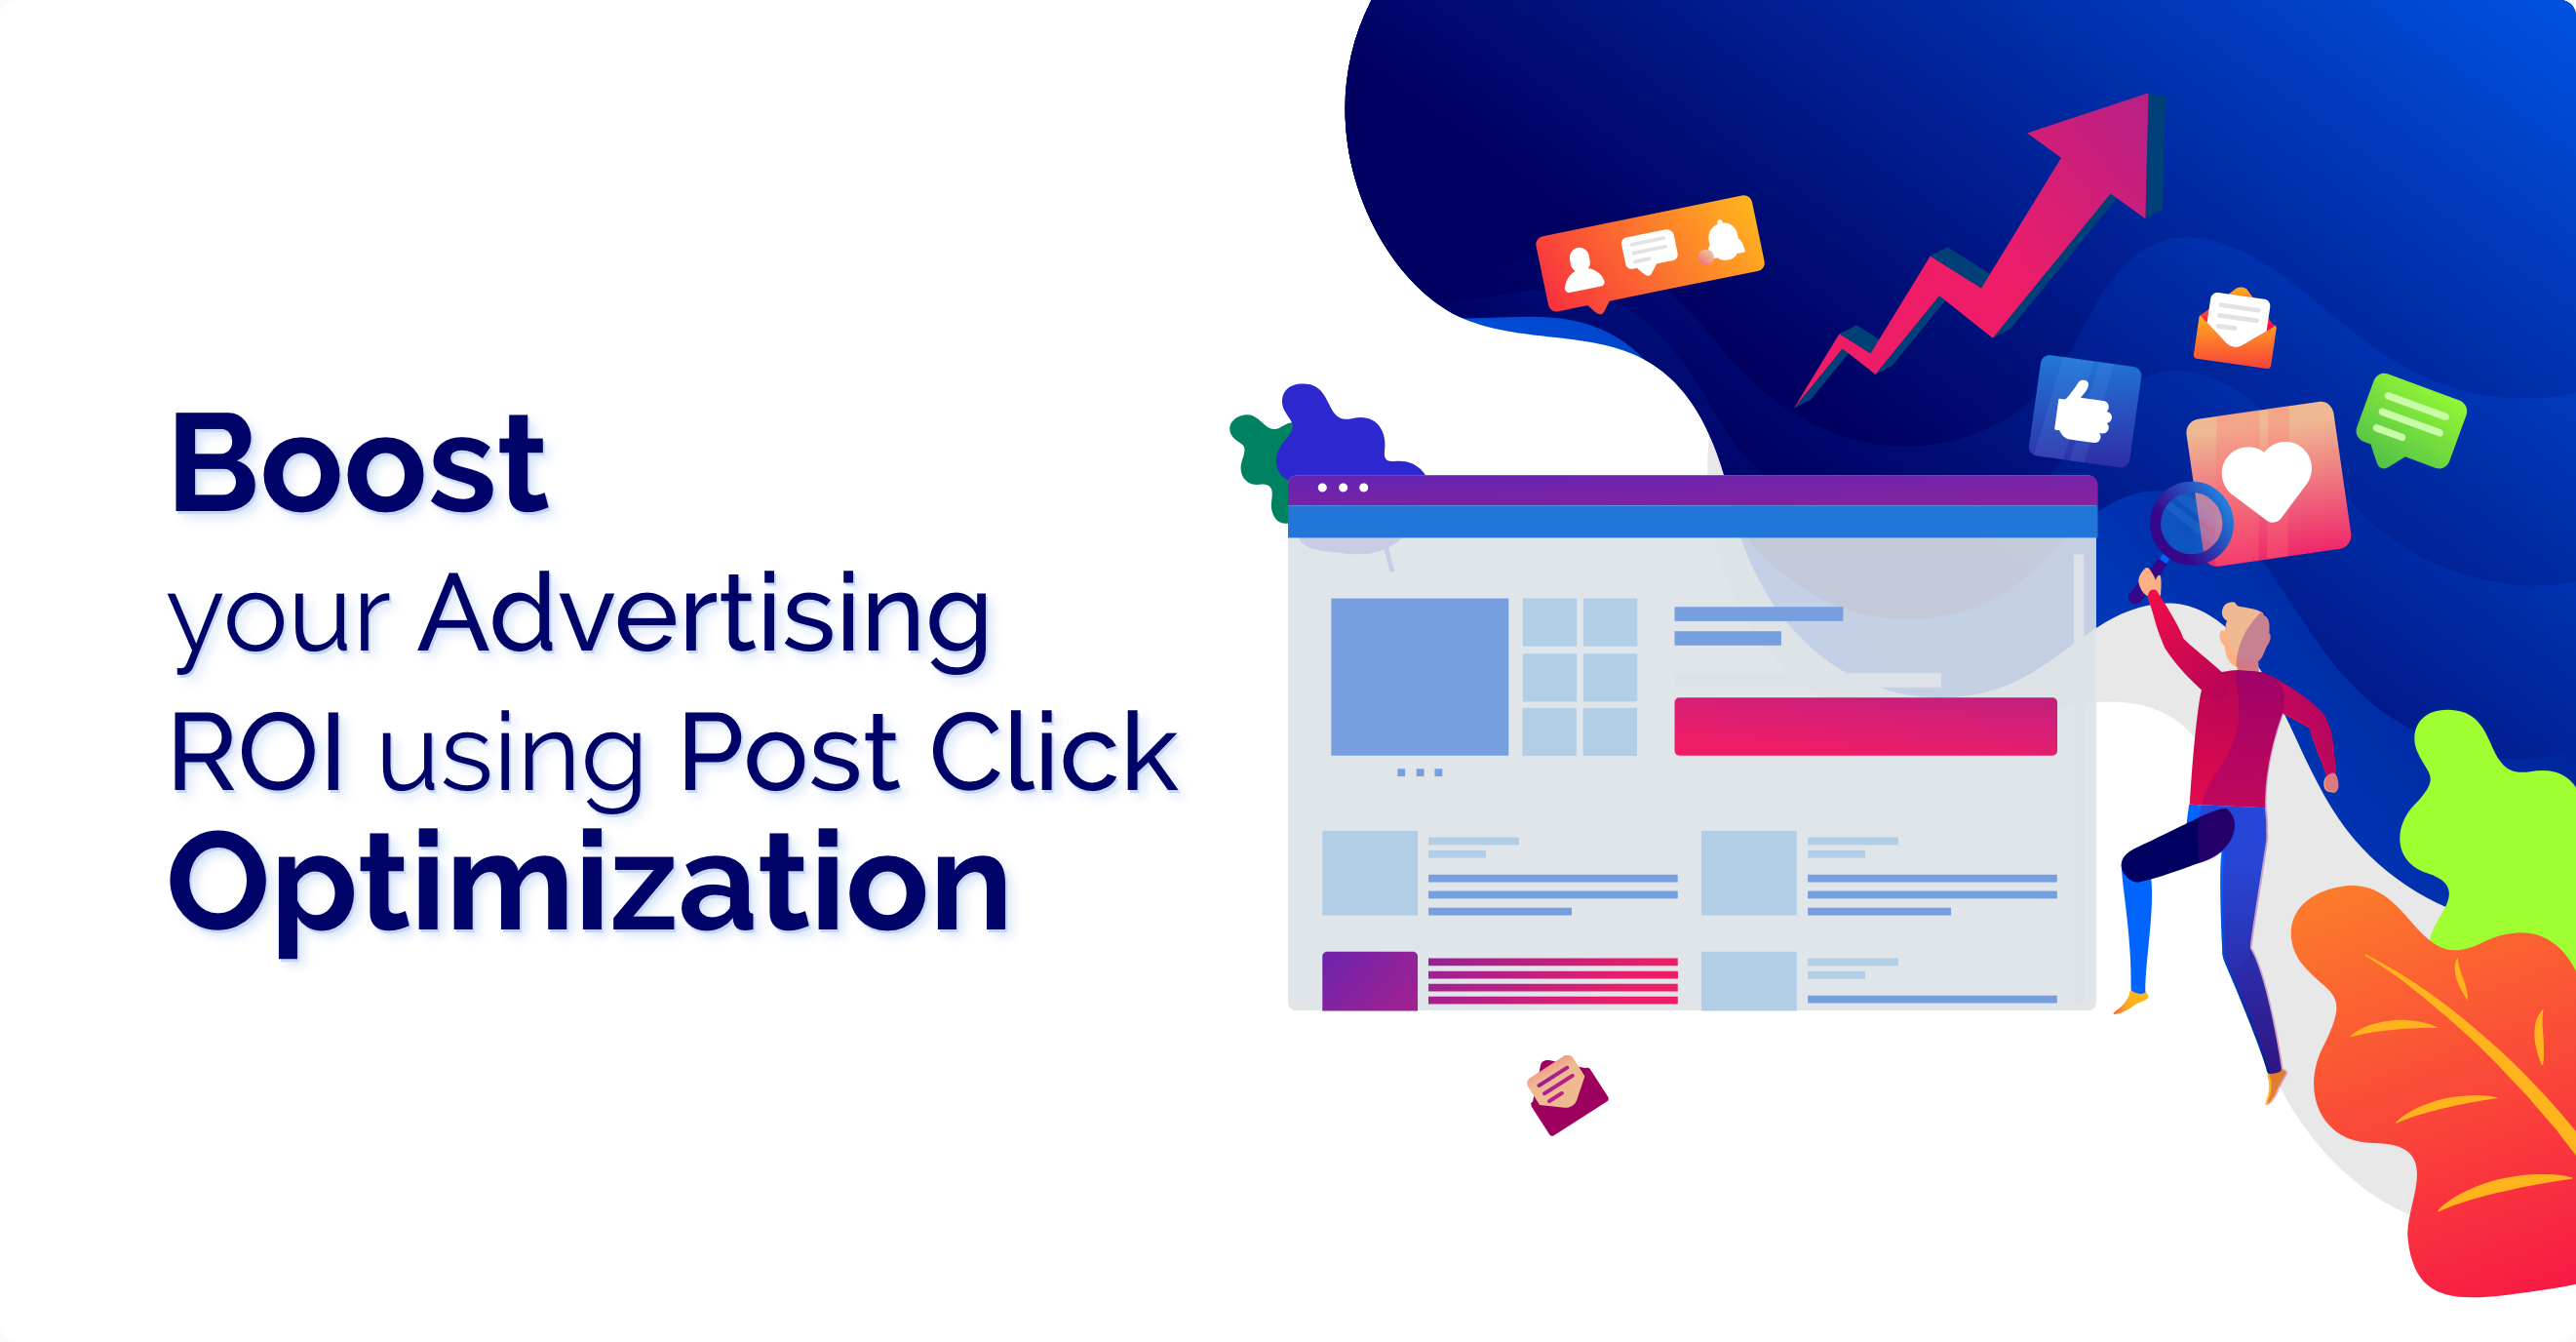 Boost your Advertising ROI using Post Click Optimization